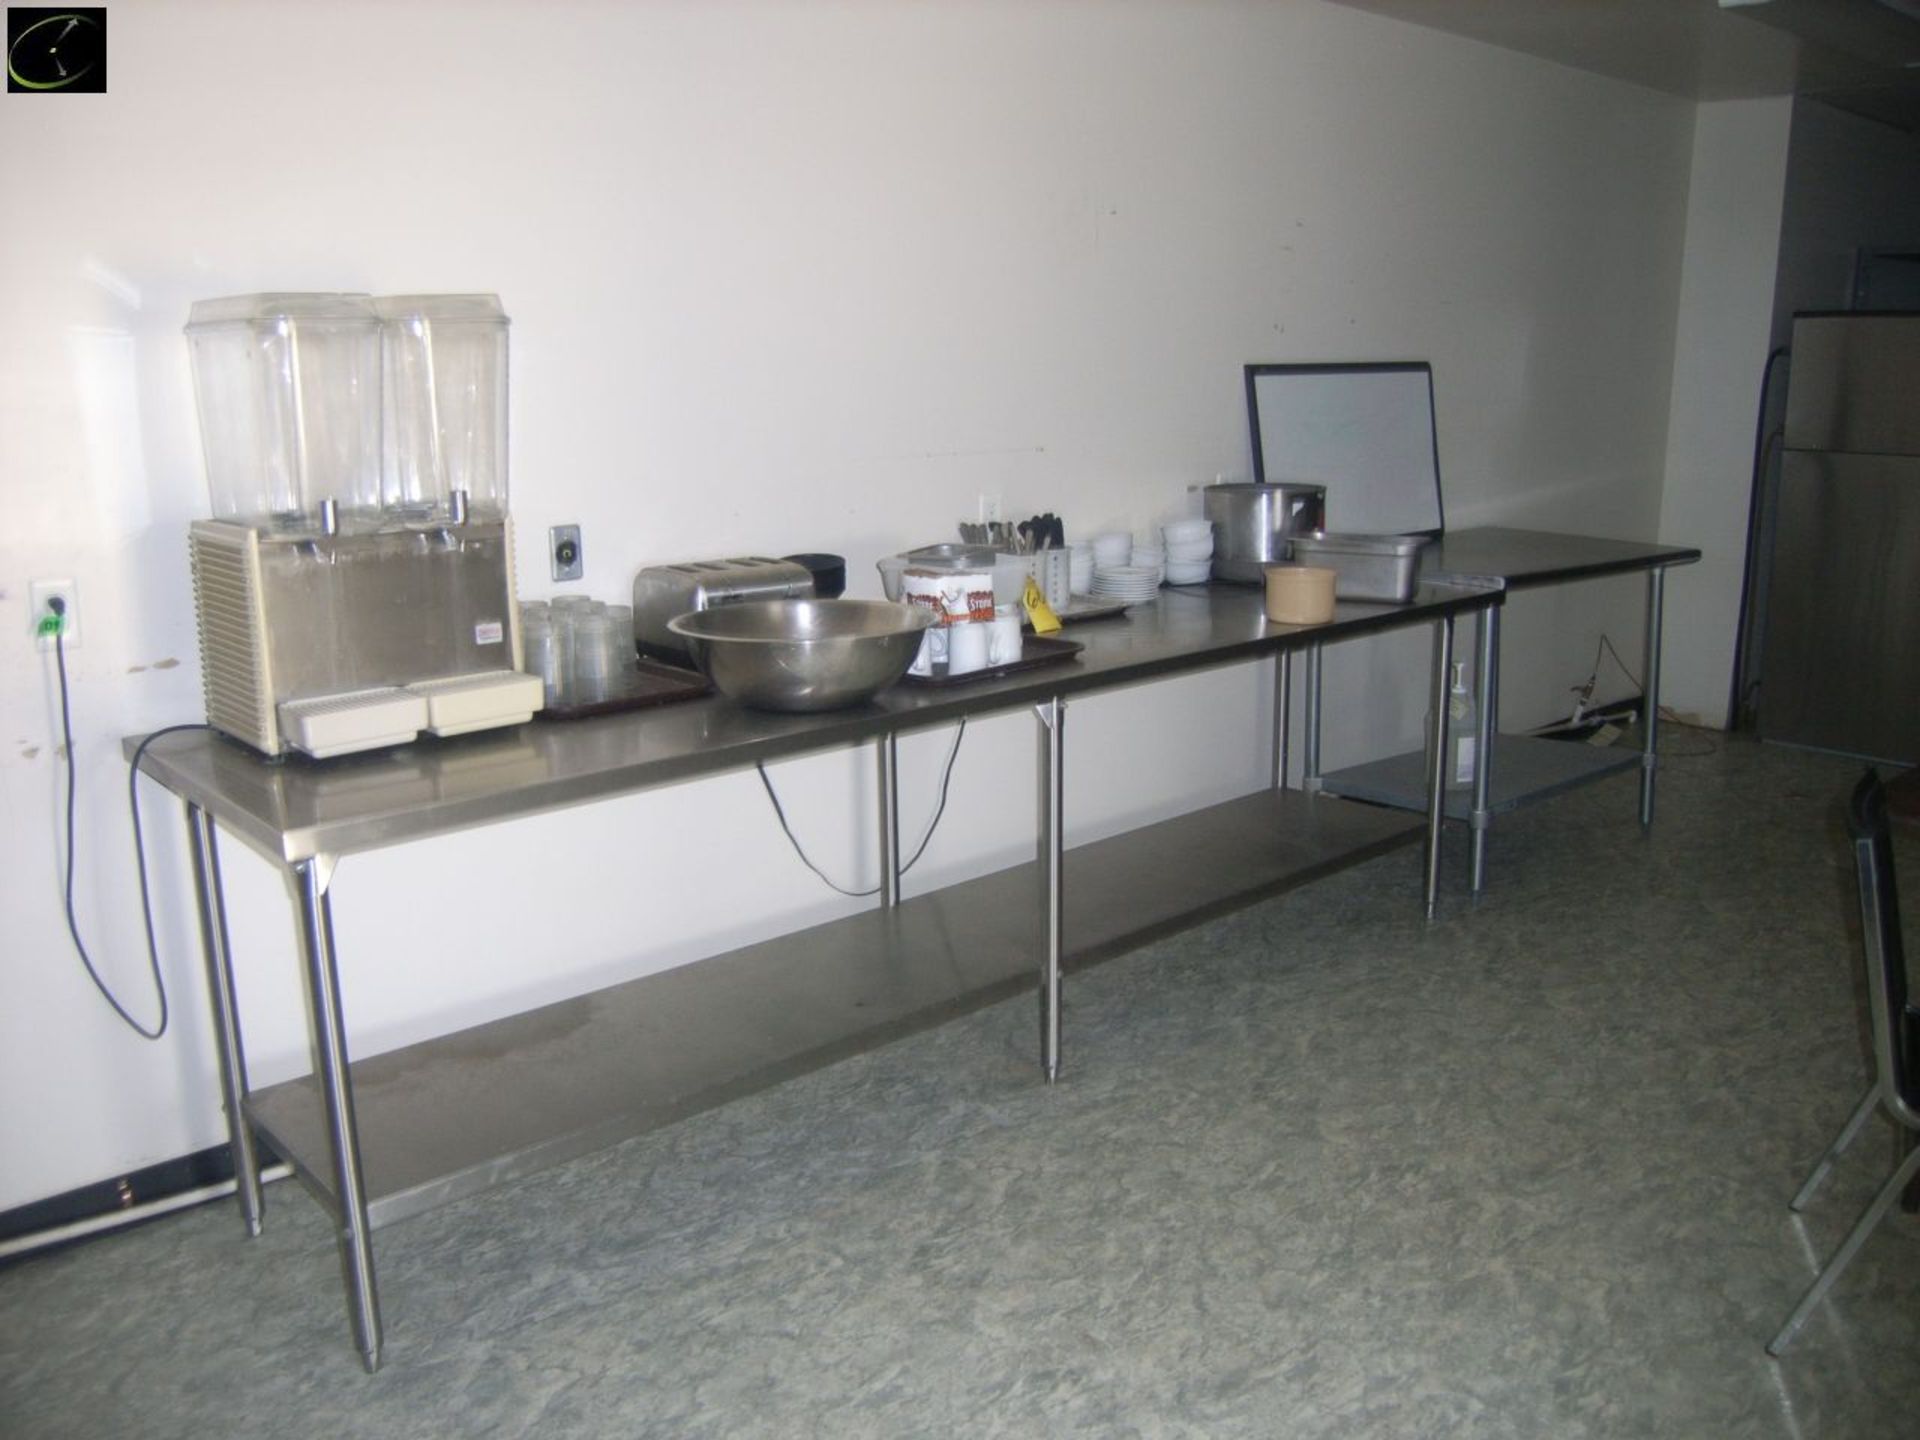 Approx. 10 Ft. Stainless Steel Table & Approx. 4 Ft. Stainless Steel Table w/ Juice Dispenser,